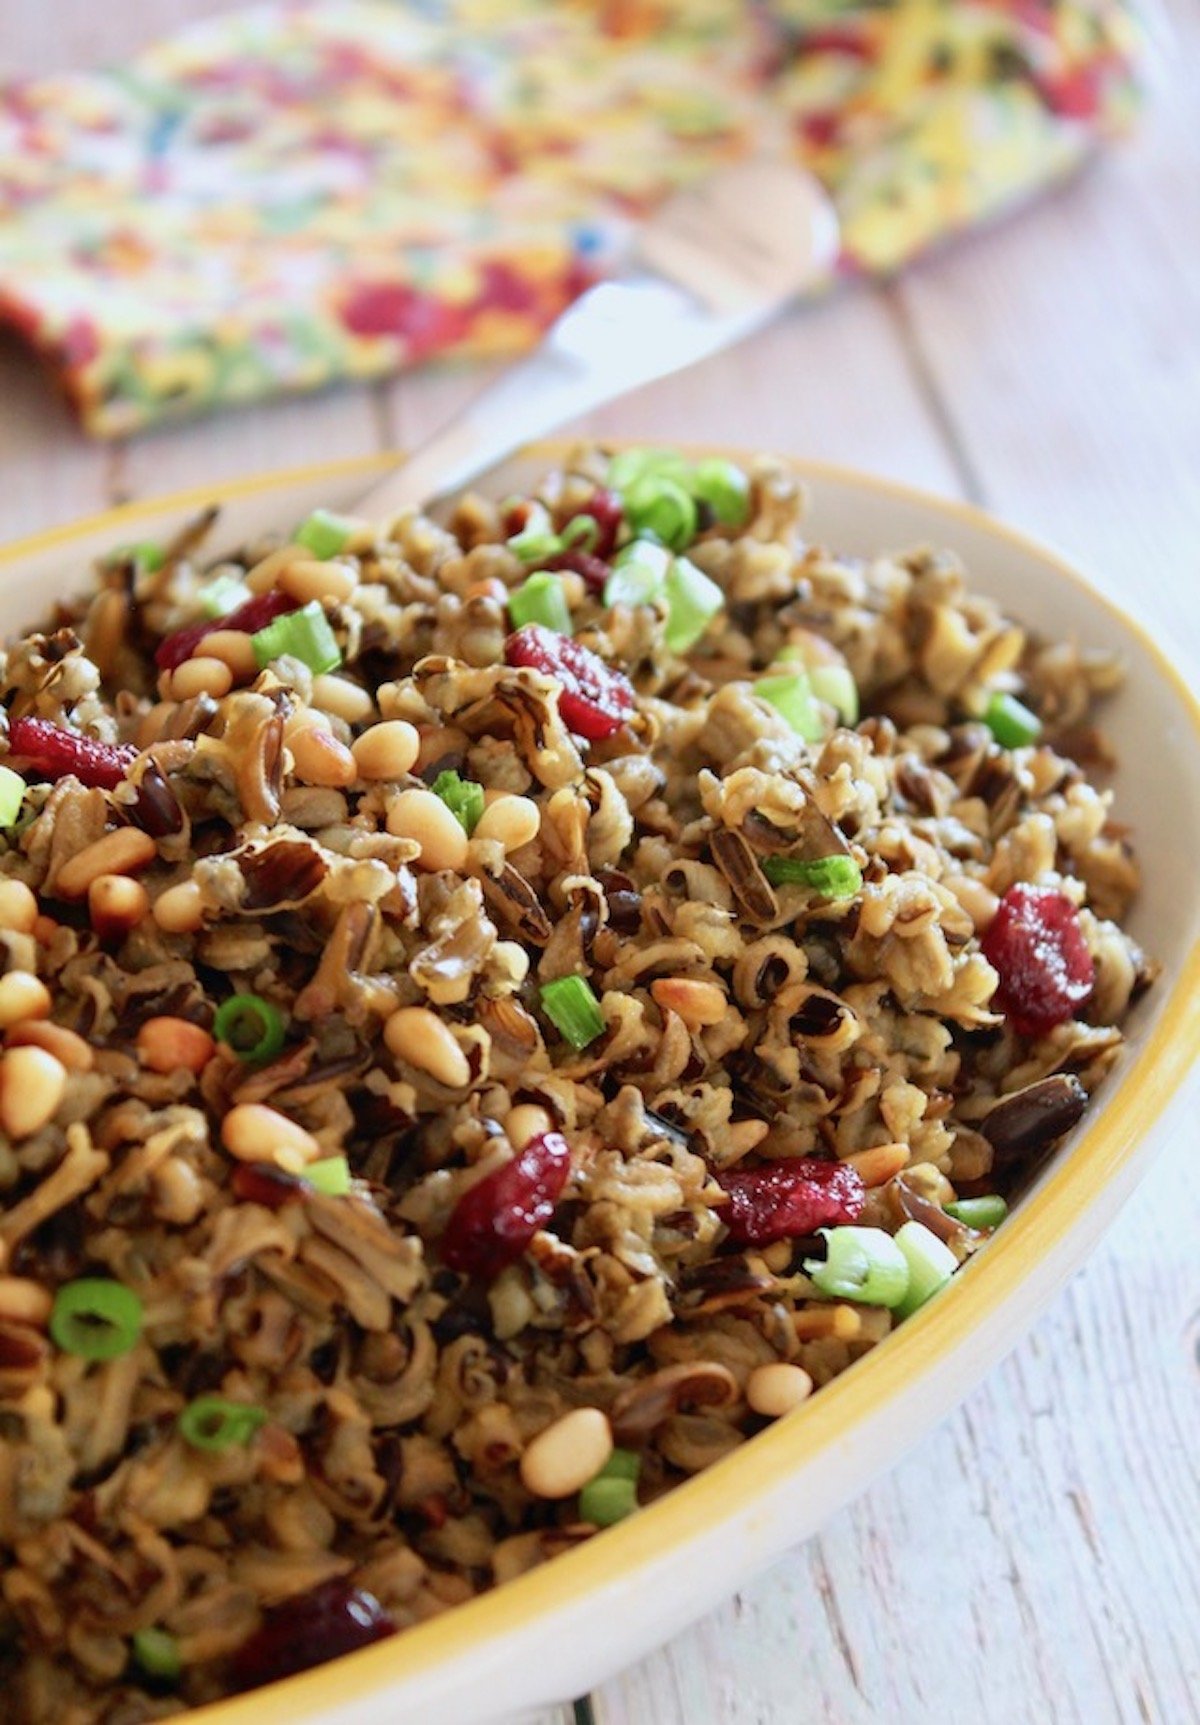 Yellow-Rimmed Dish with Wild Rice and cranberries.